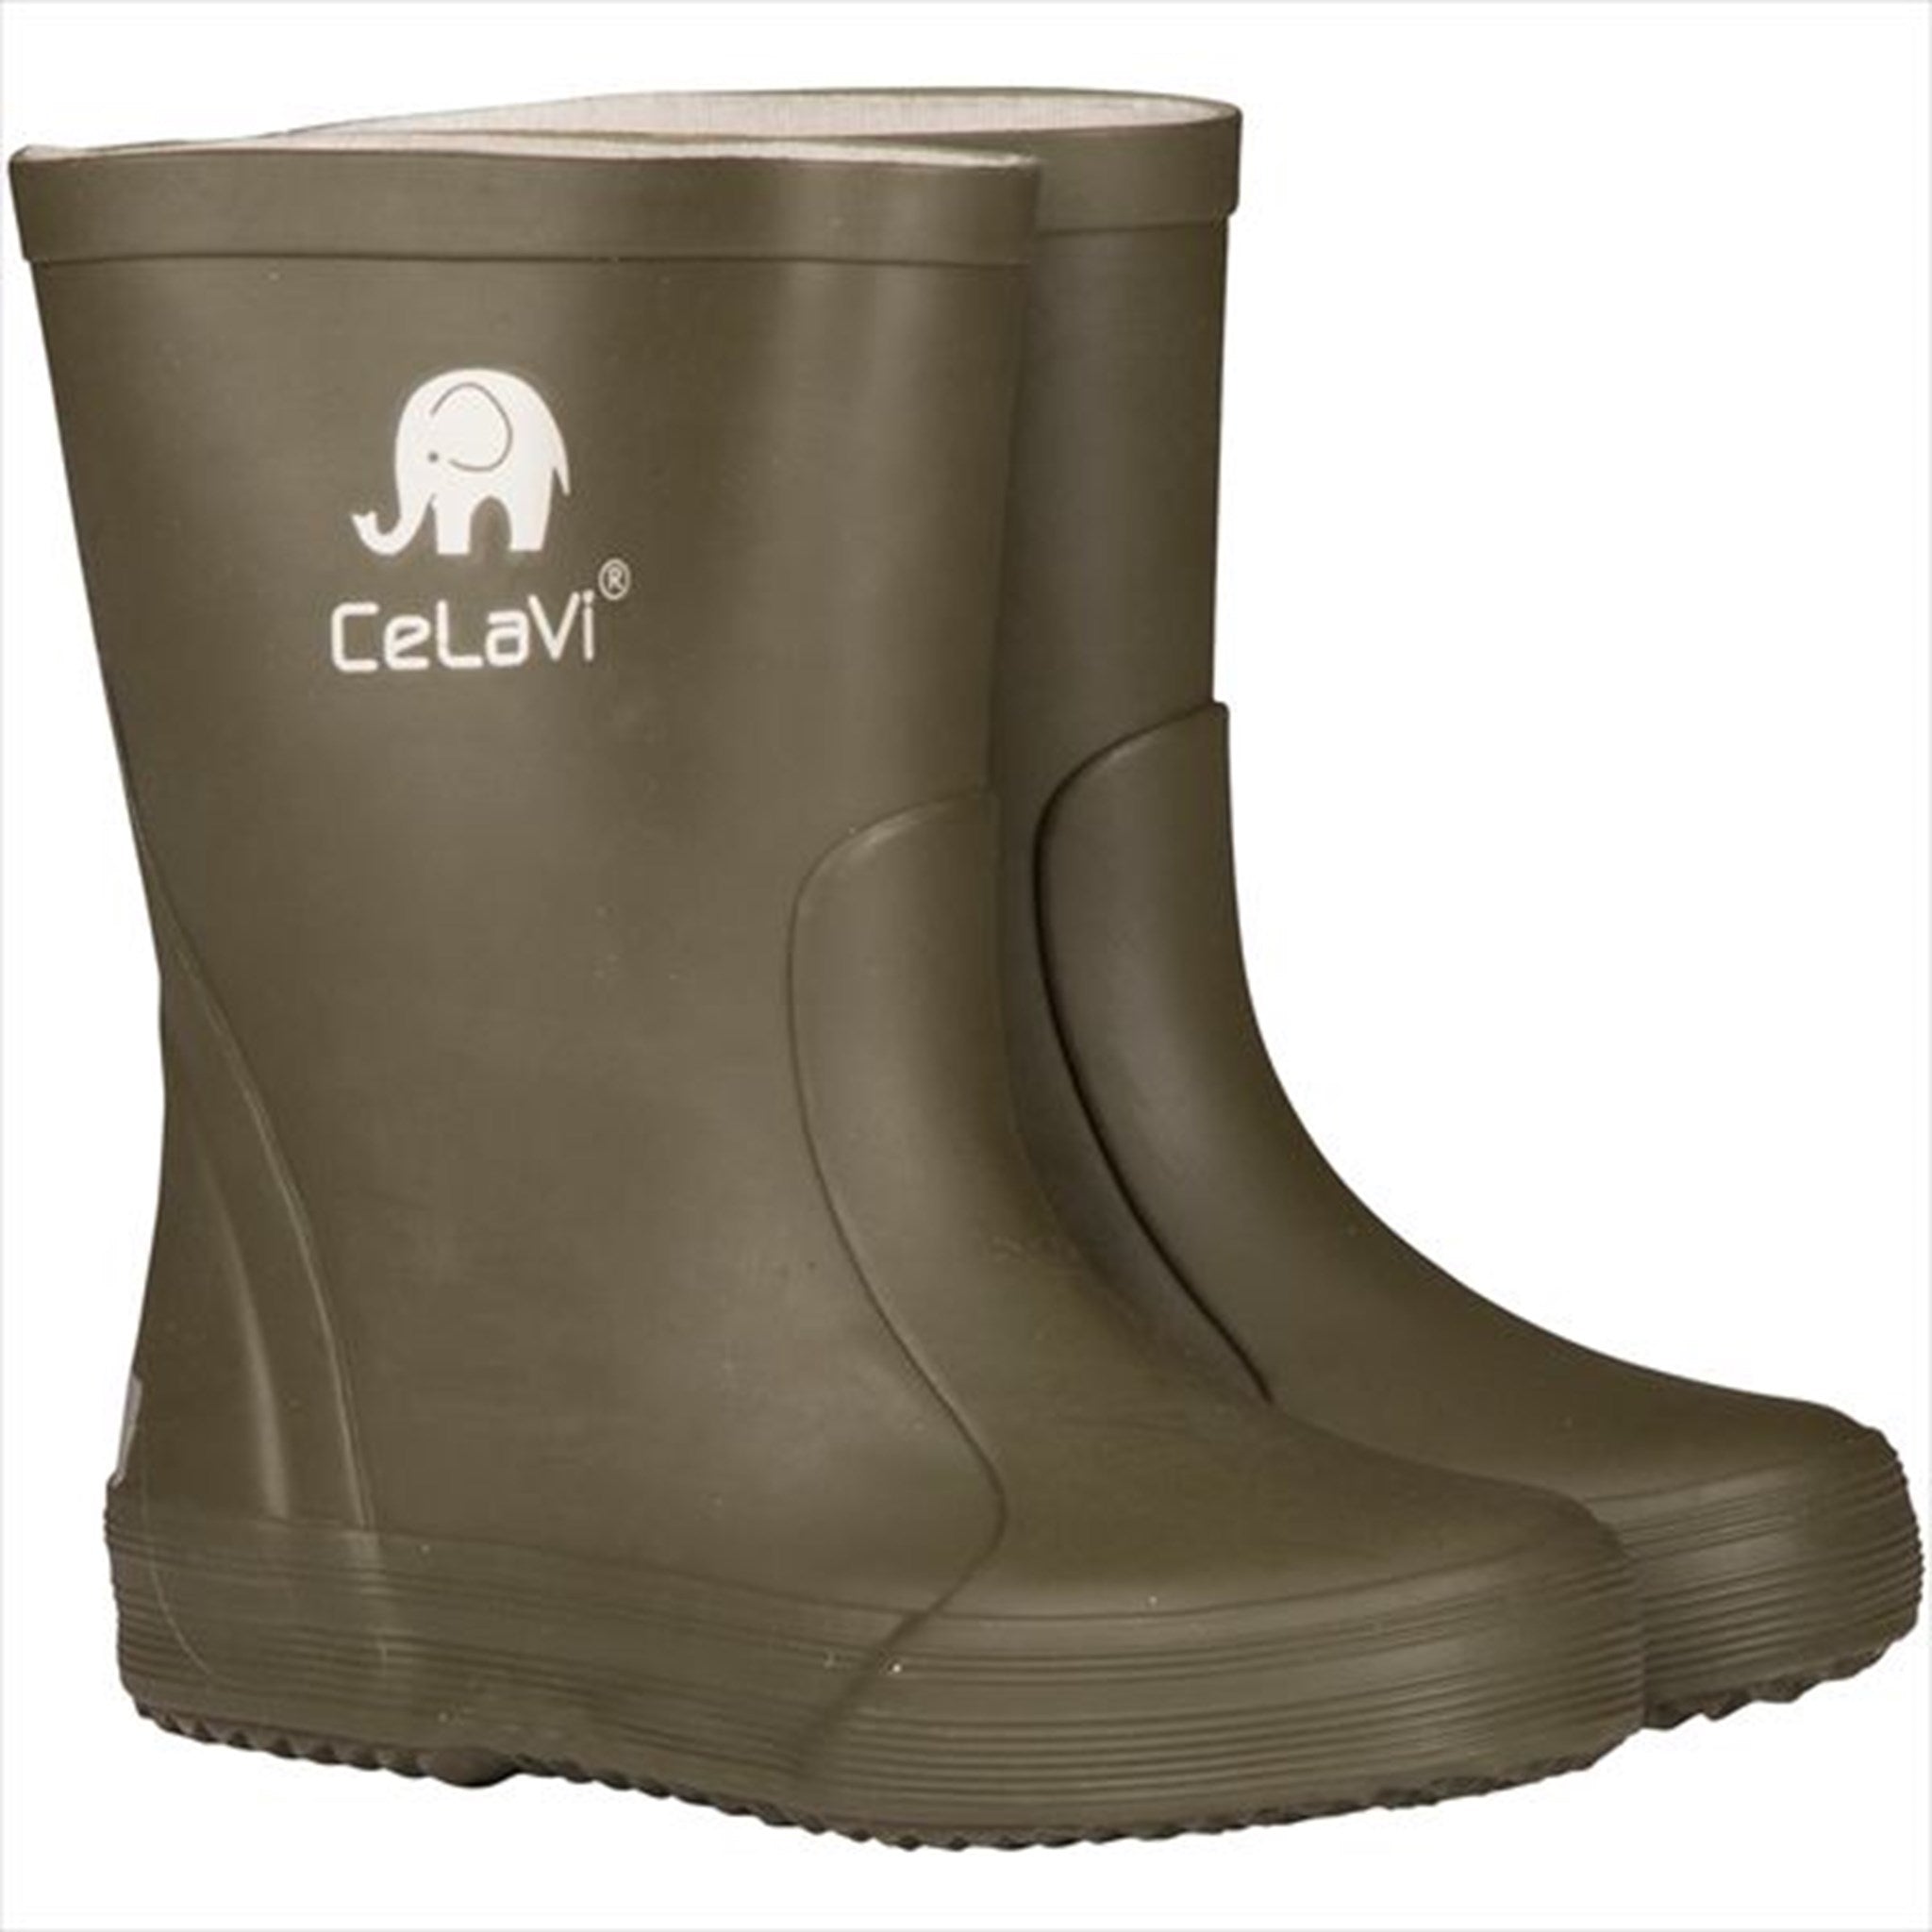 CeLaVi Wellies New Basic Boot Army